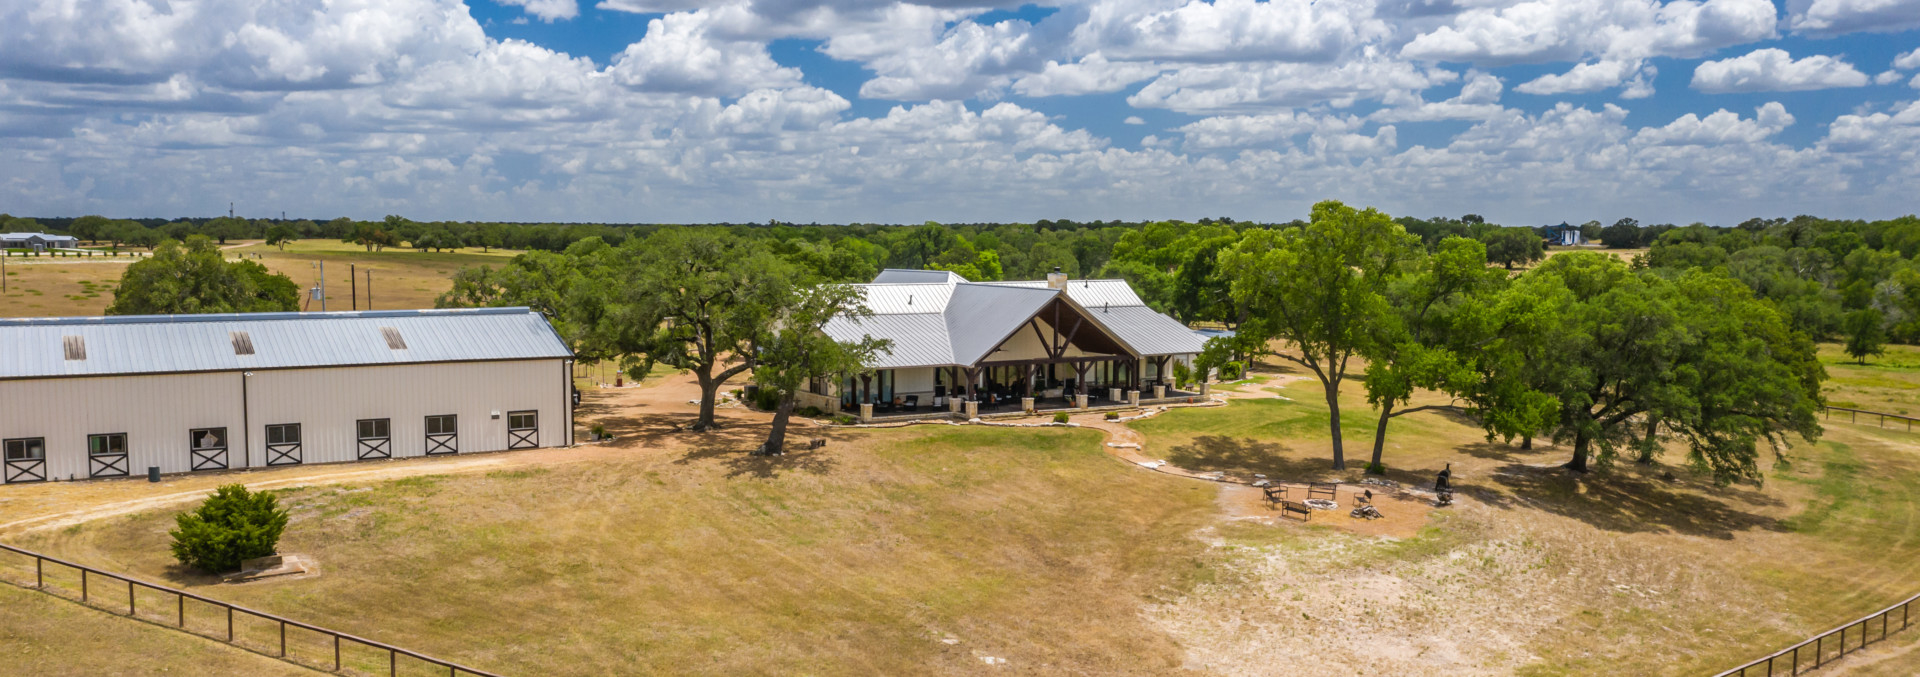 texas land for sale rolling oaks ranch